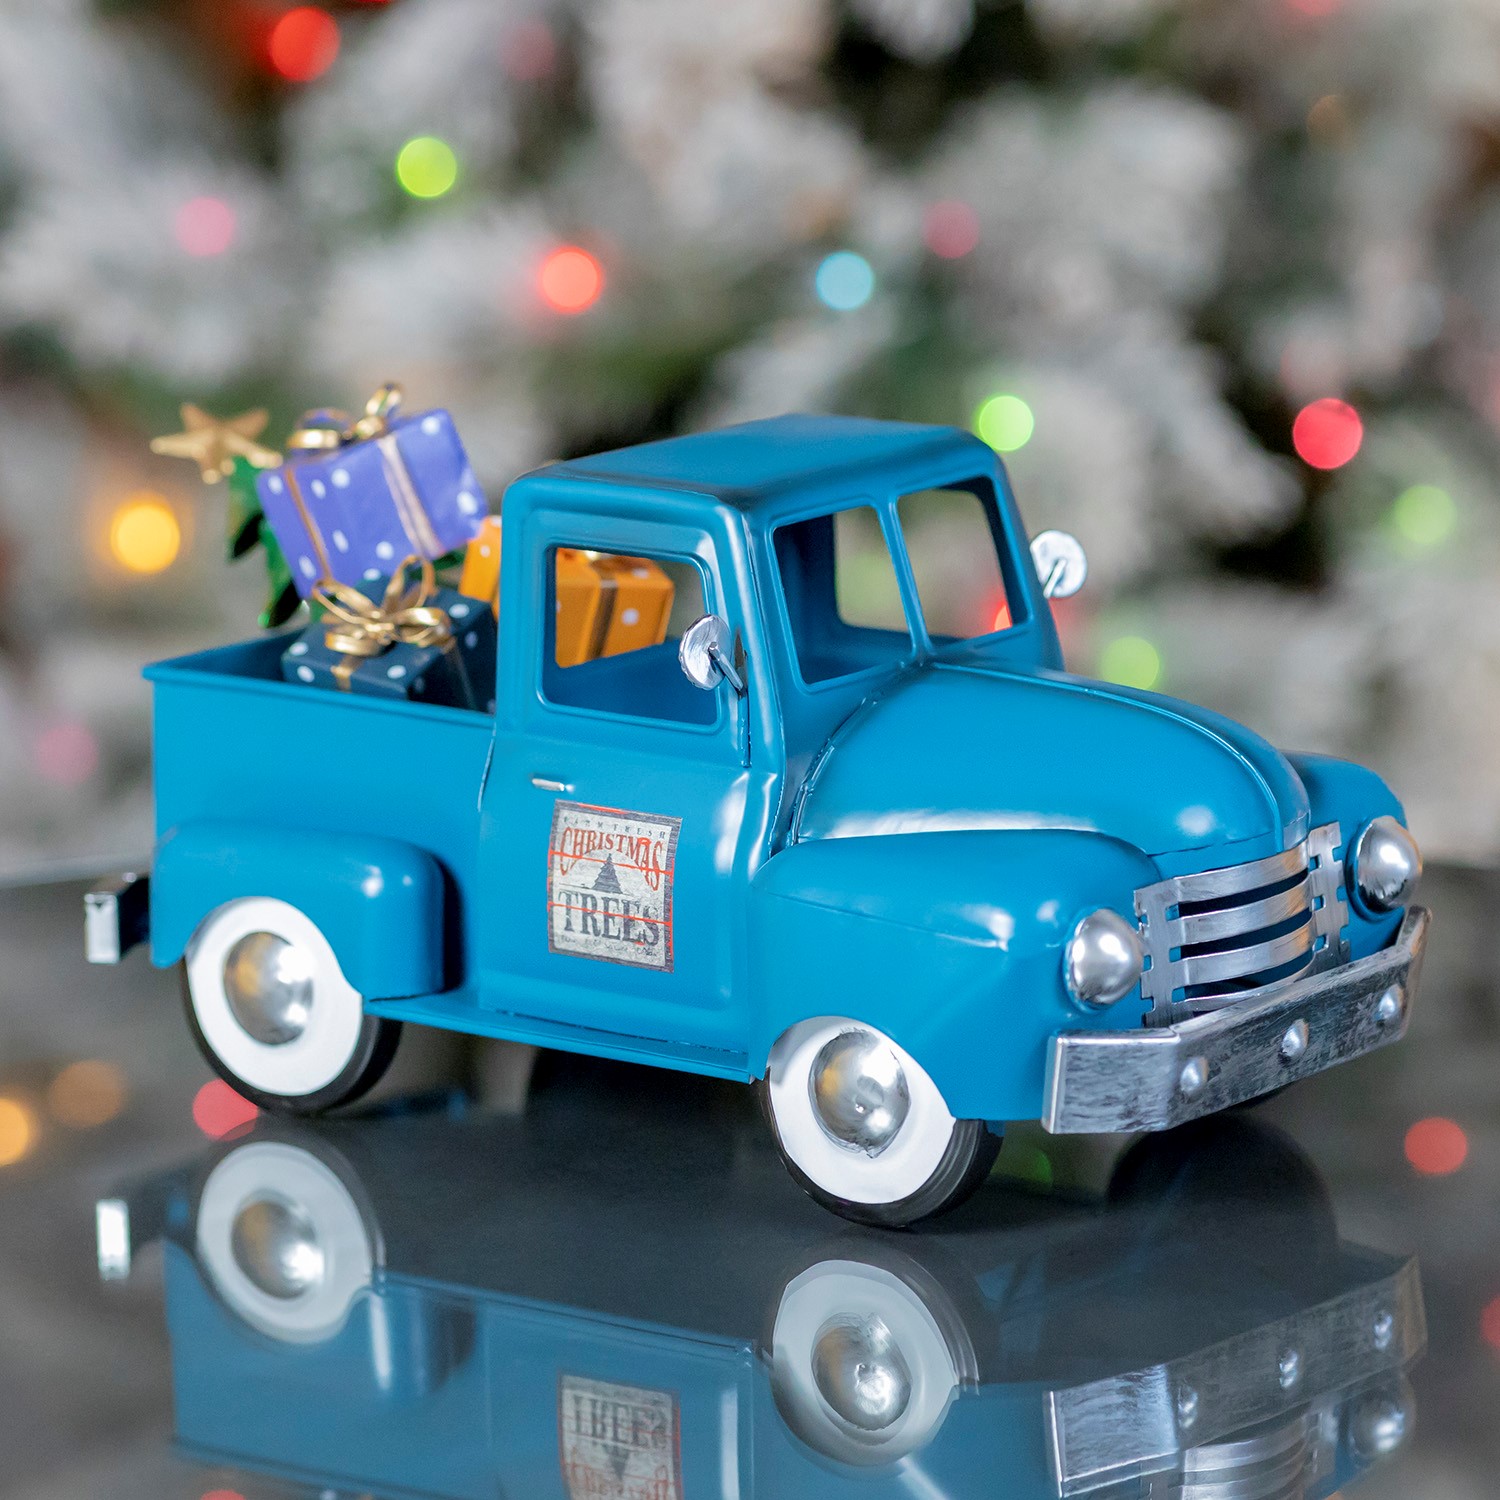 Iron Christmas Old Style Truck with Tree in Antique Blue